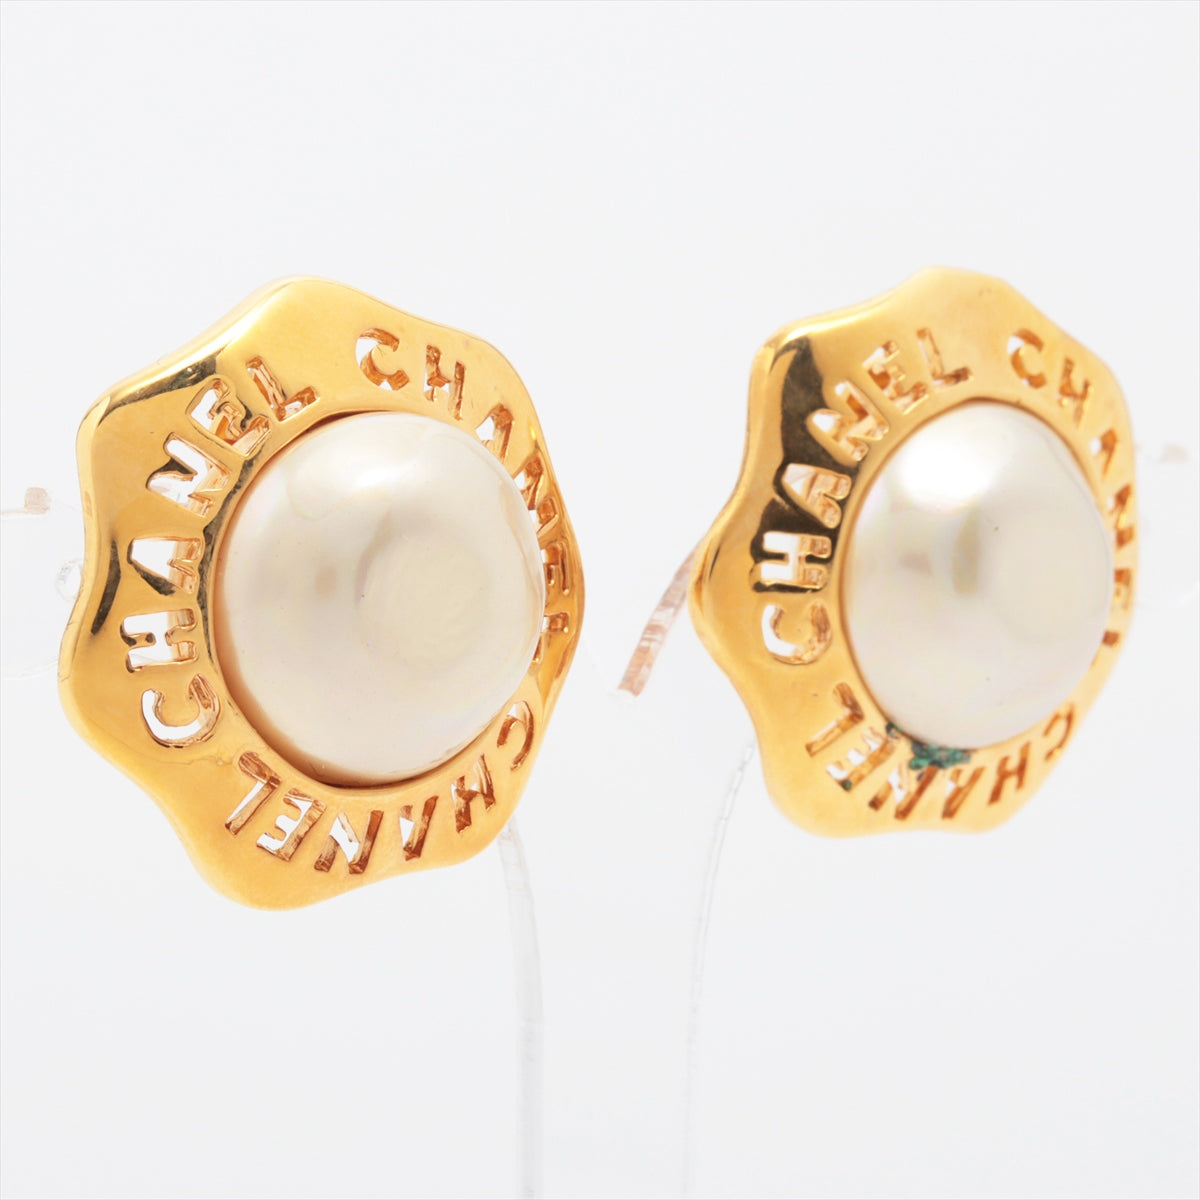 Chanel Logo 2356 Earrings (for both ears) GP x Imitation pearl Gold Wears Stained Oxidation staining Discoloration